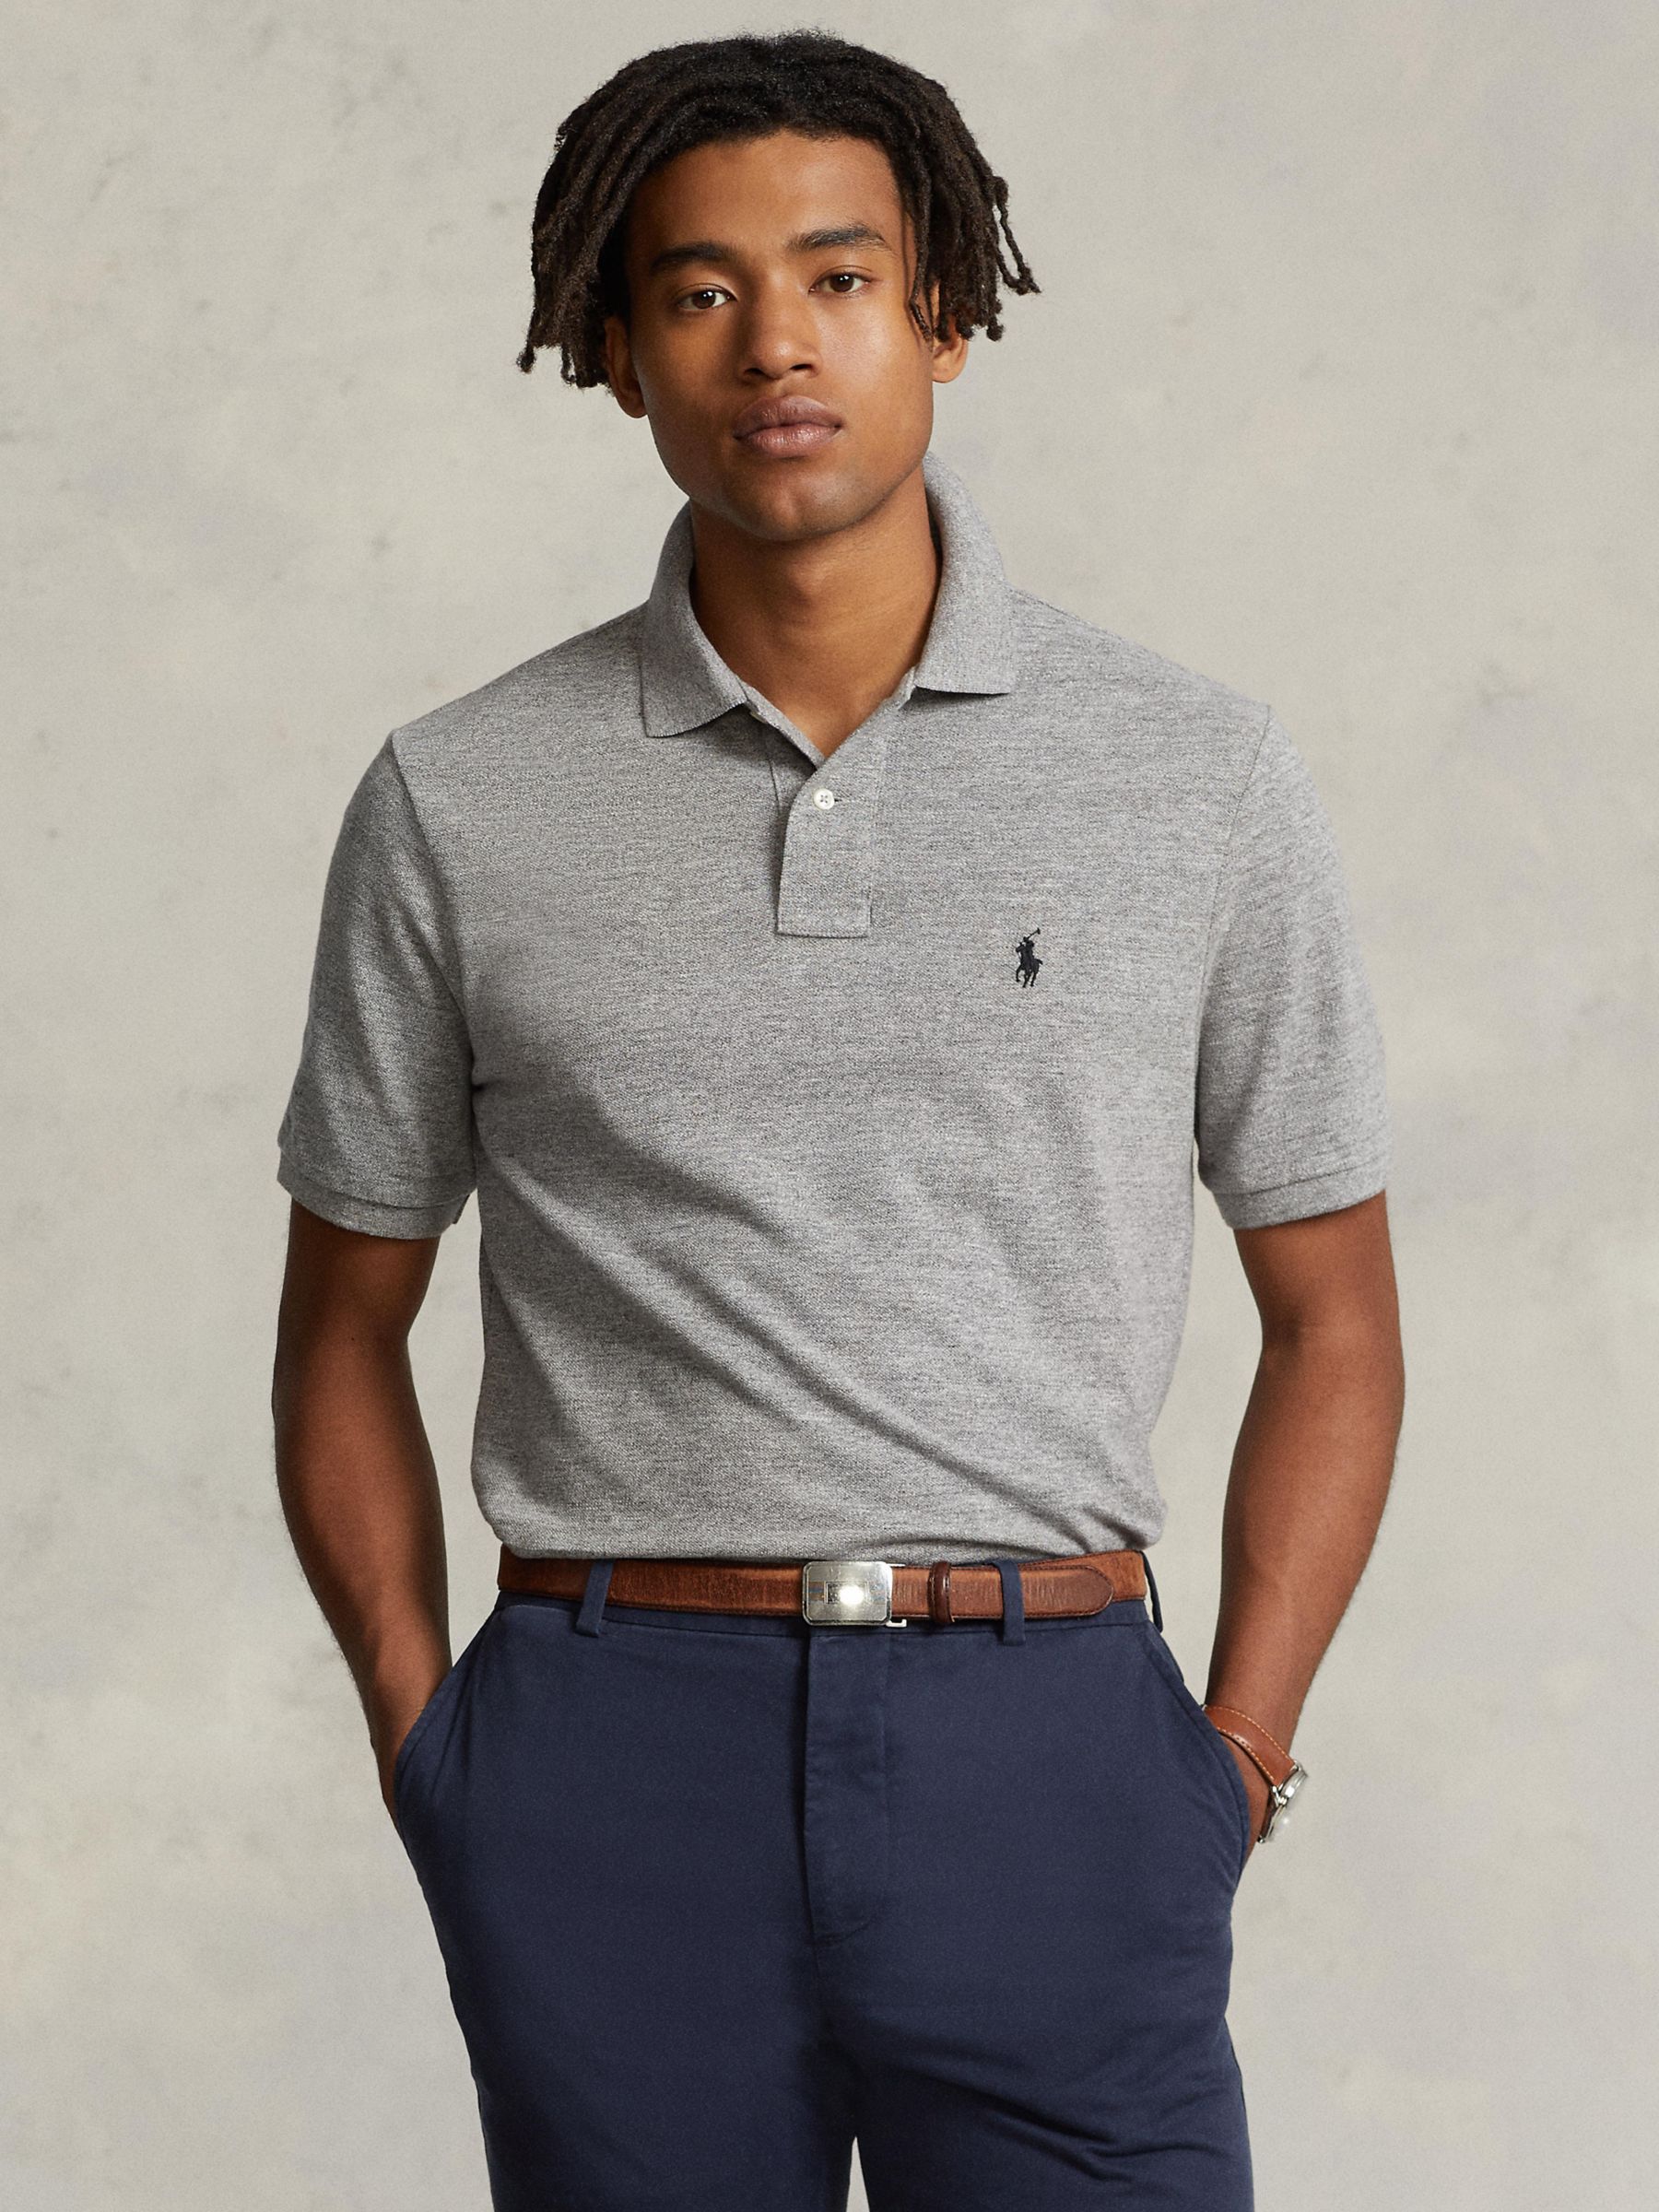 POLO RALPH LAUREN CLASSIC FIT FLAG-EMBROIDERED POLO SHIRT, Blue Men's Polo  Shirt